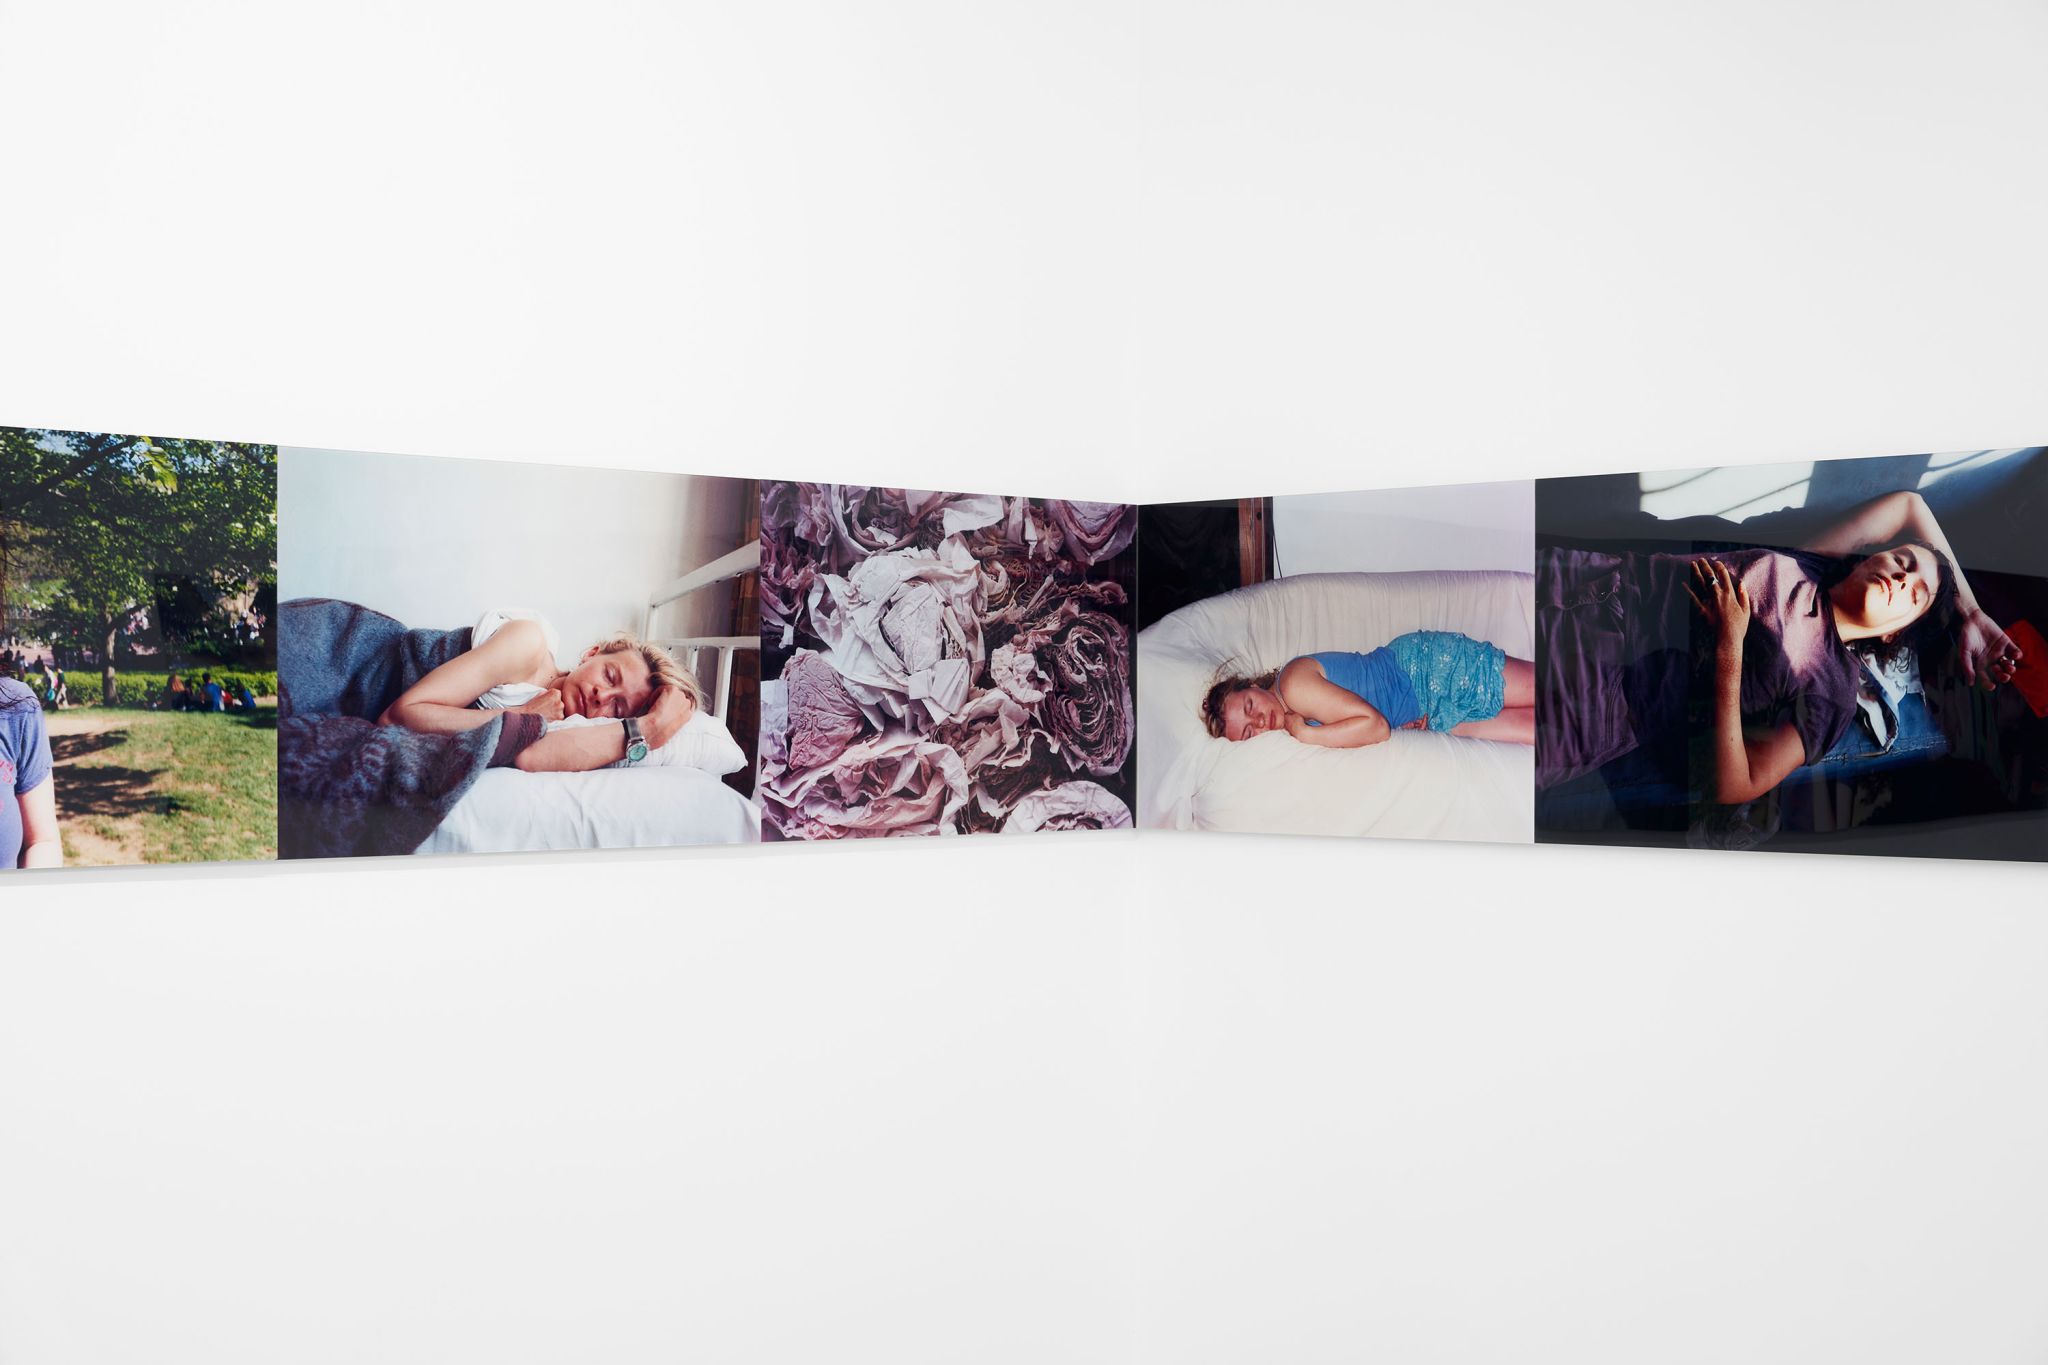 A.L. Steiner, Eat, Sleep, Disposable (retrieved) (detail), 16 photographic prints behind acrylic glass, Installation: 60 ⁠× ⁠1440 ⁠cm, Installation view, <em>Prologue: Disaster Paradise</em>